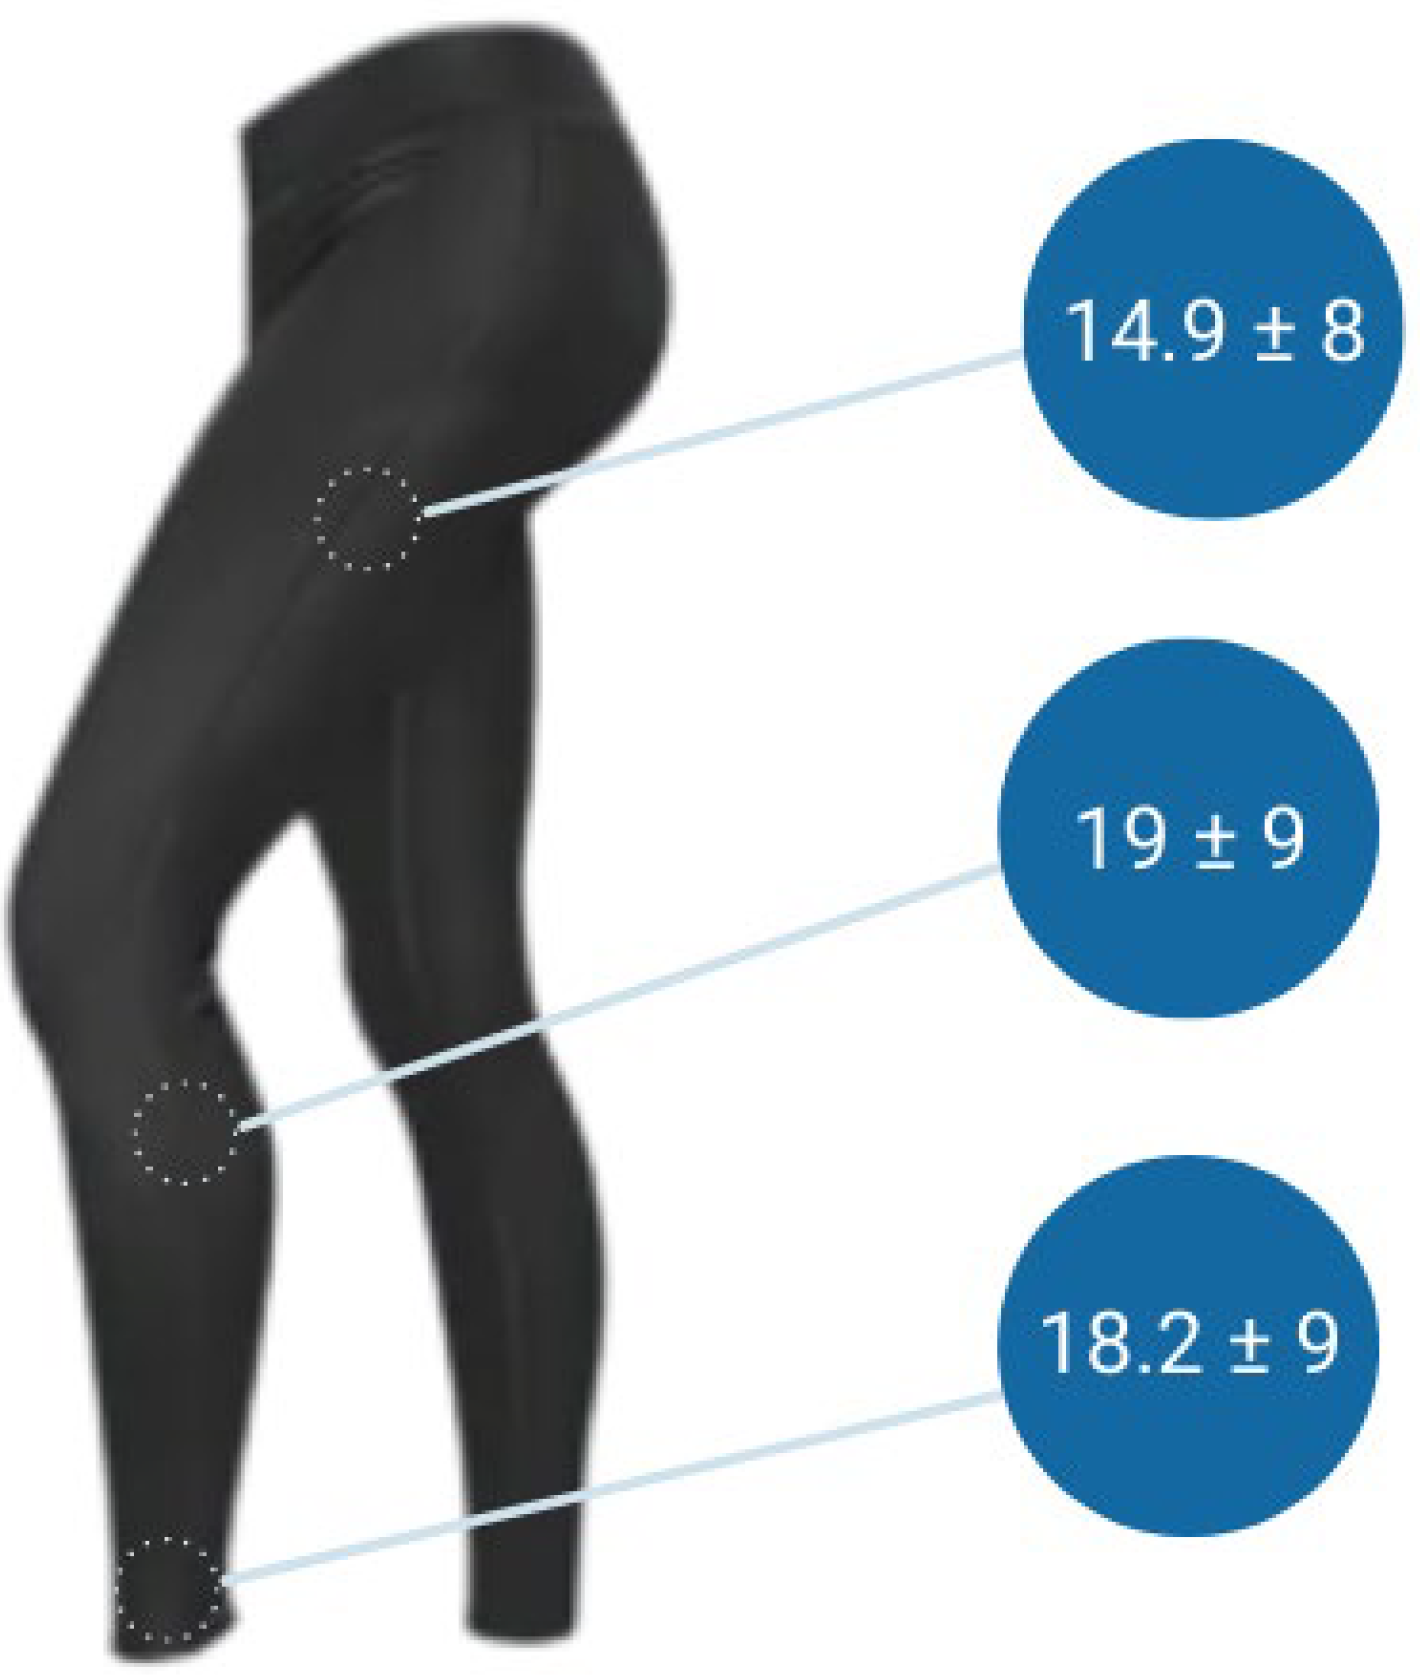 Compression Garments & Recovery from Exercise: Positive Effects on